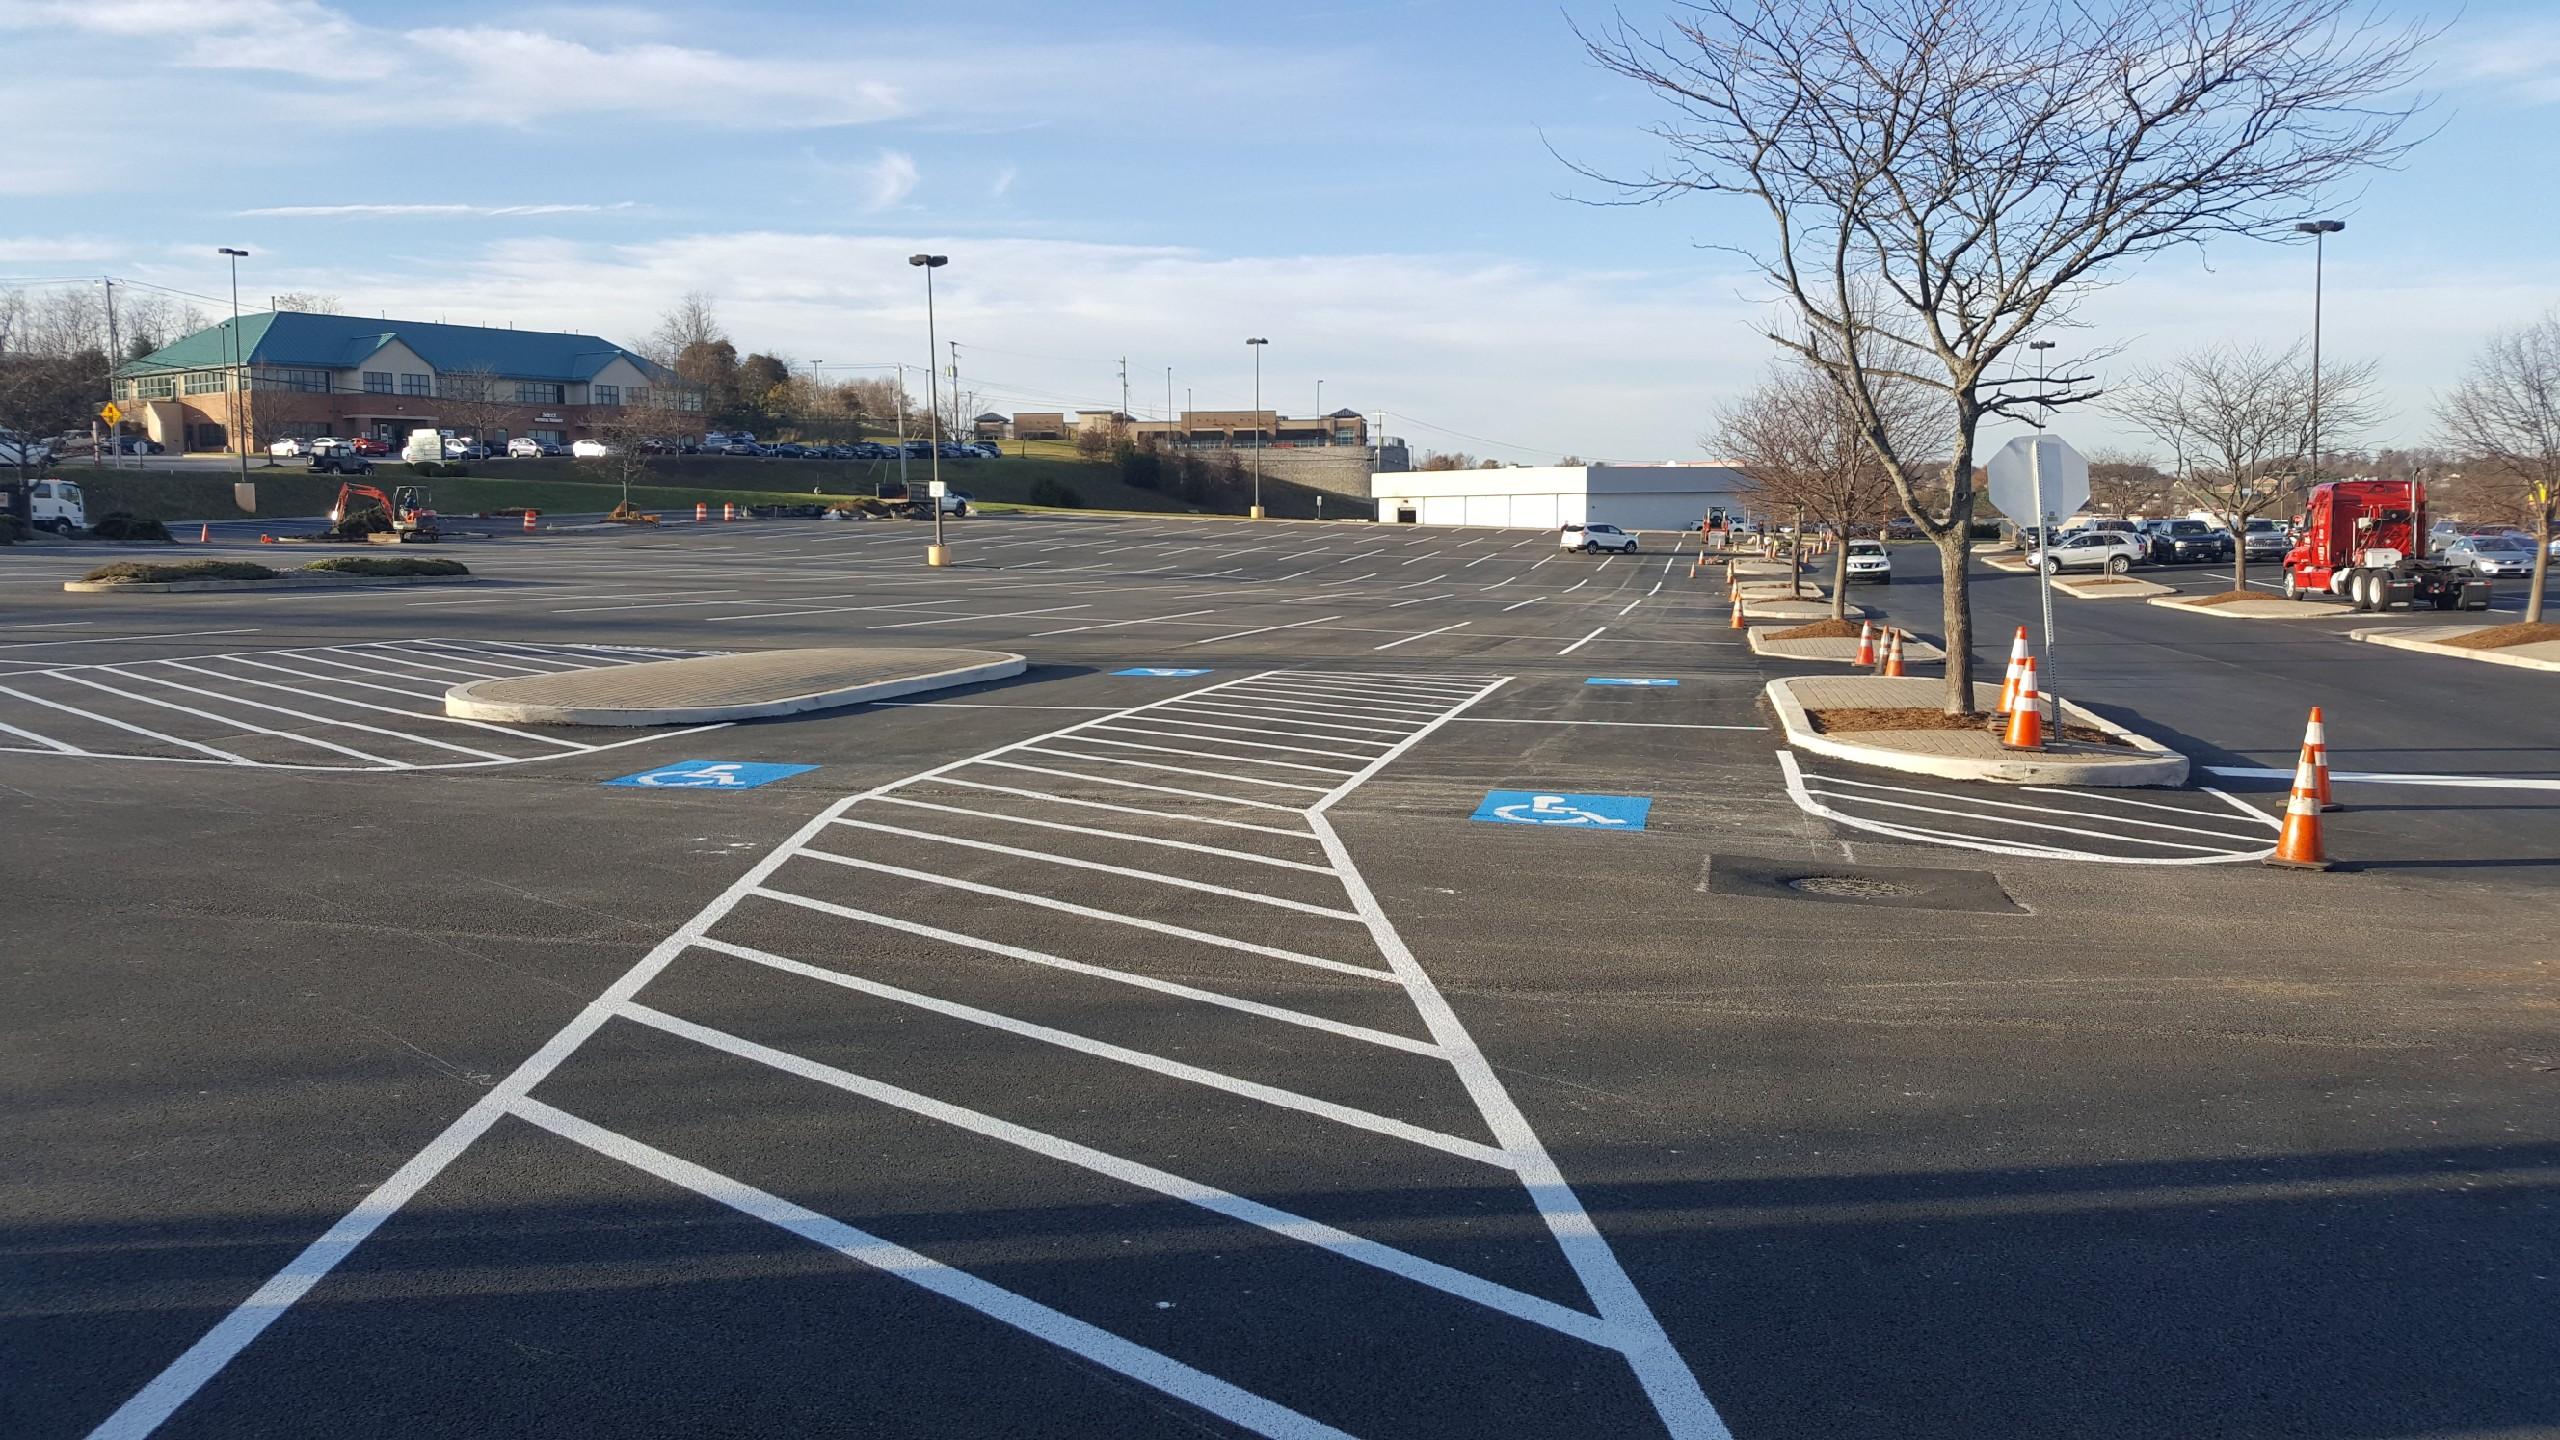 Shrewsbury Commons is one of our commercial paving projects. This location is an existing shopping center that we milled, resurfaced and made the required ADA modifications all while keeping the center open for day to day business.